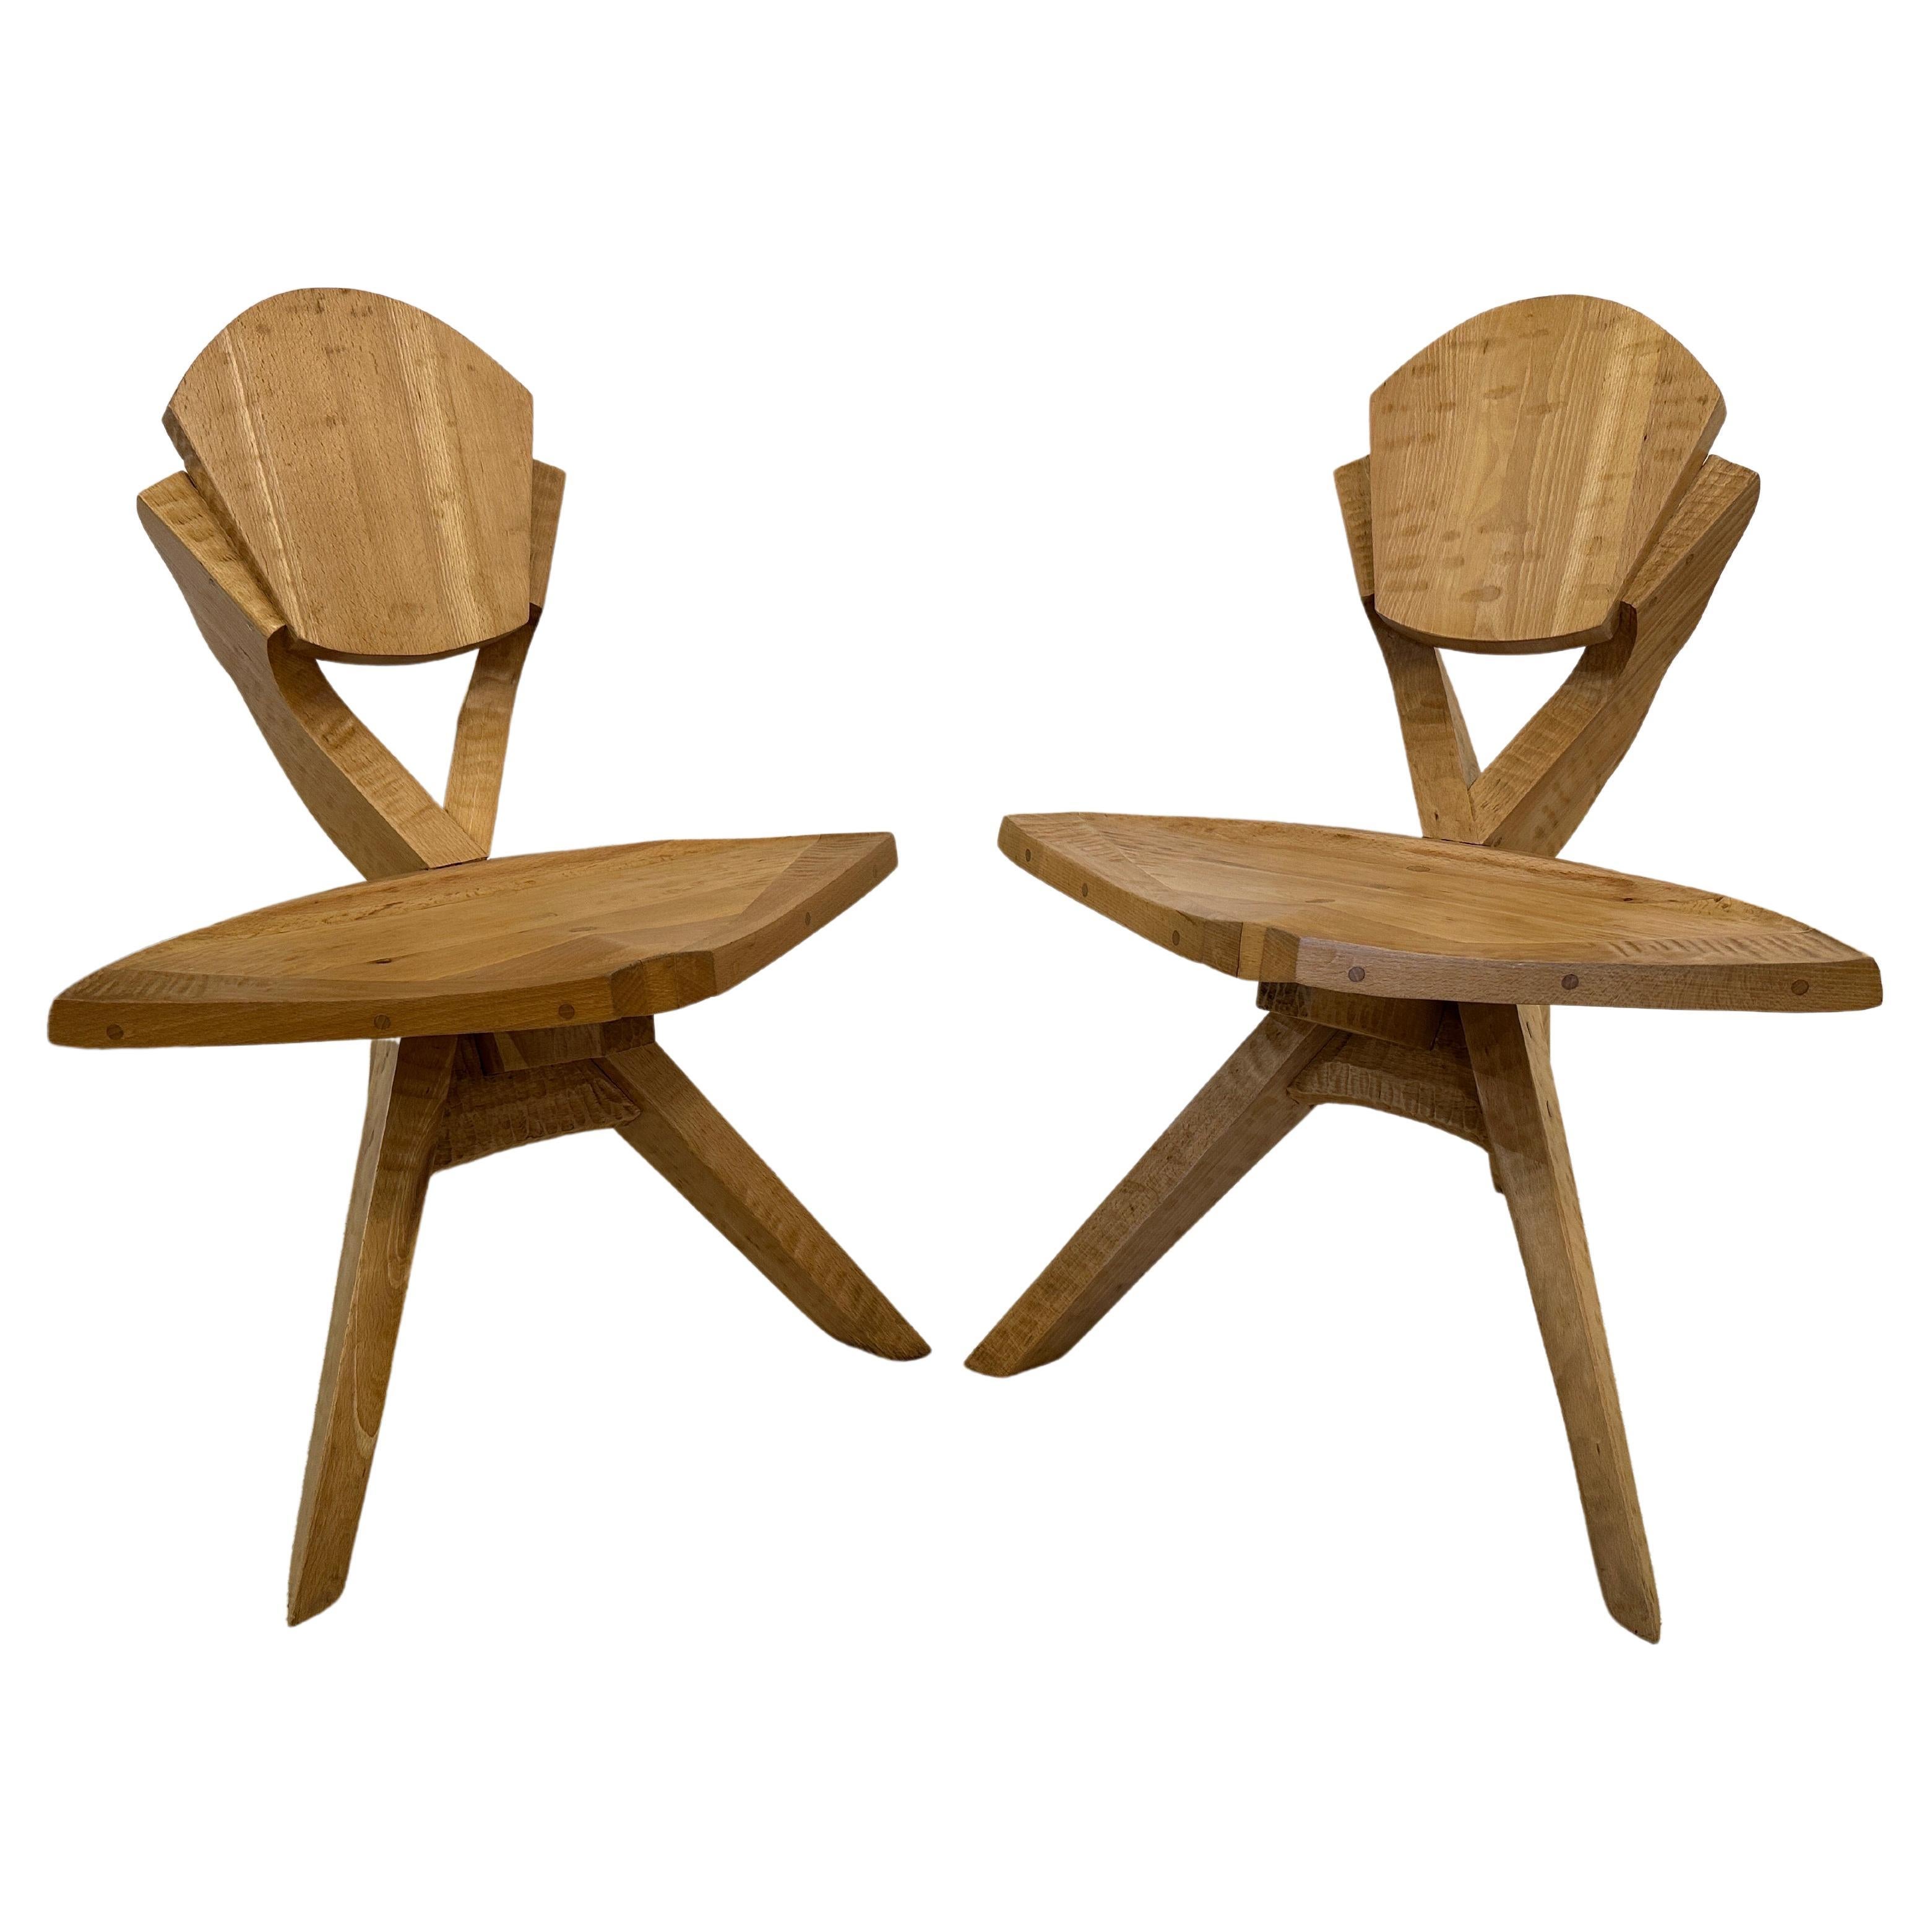 Pair of Studio Art Chairs in Carved Wood